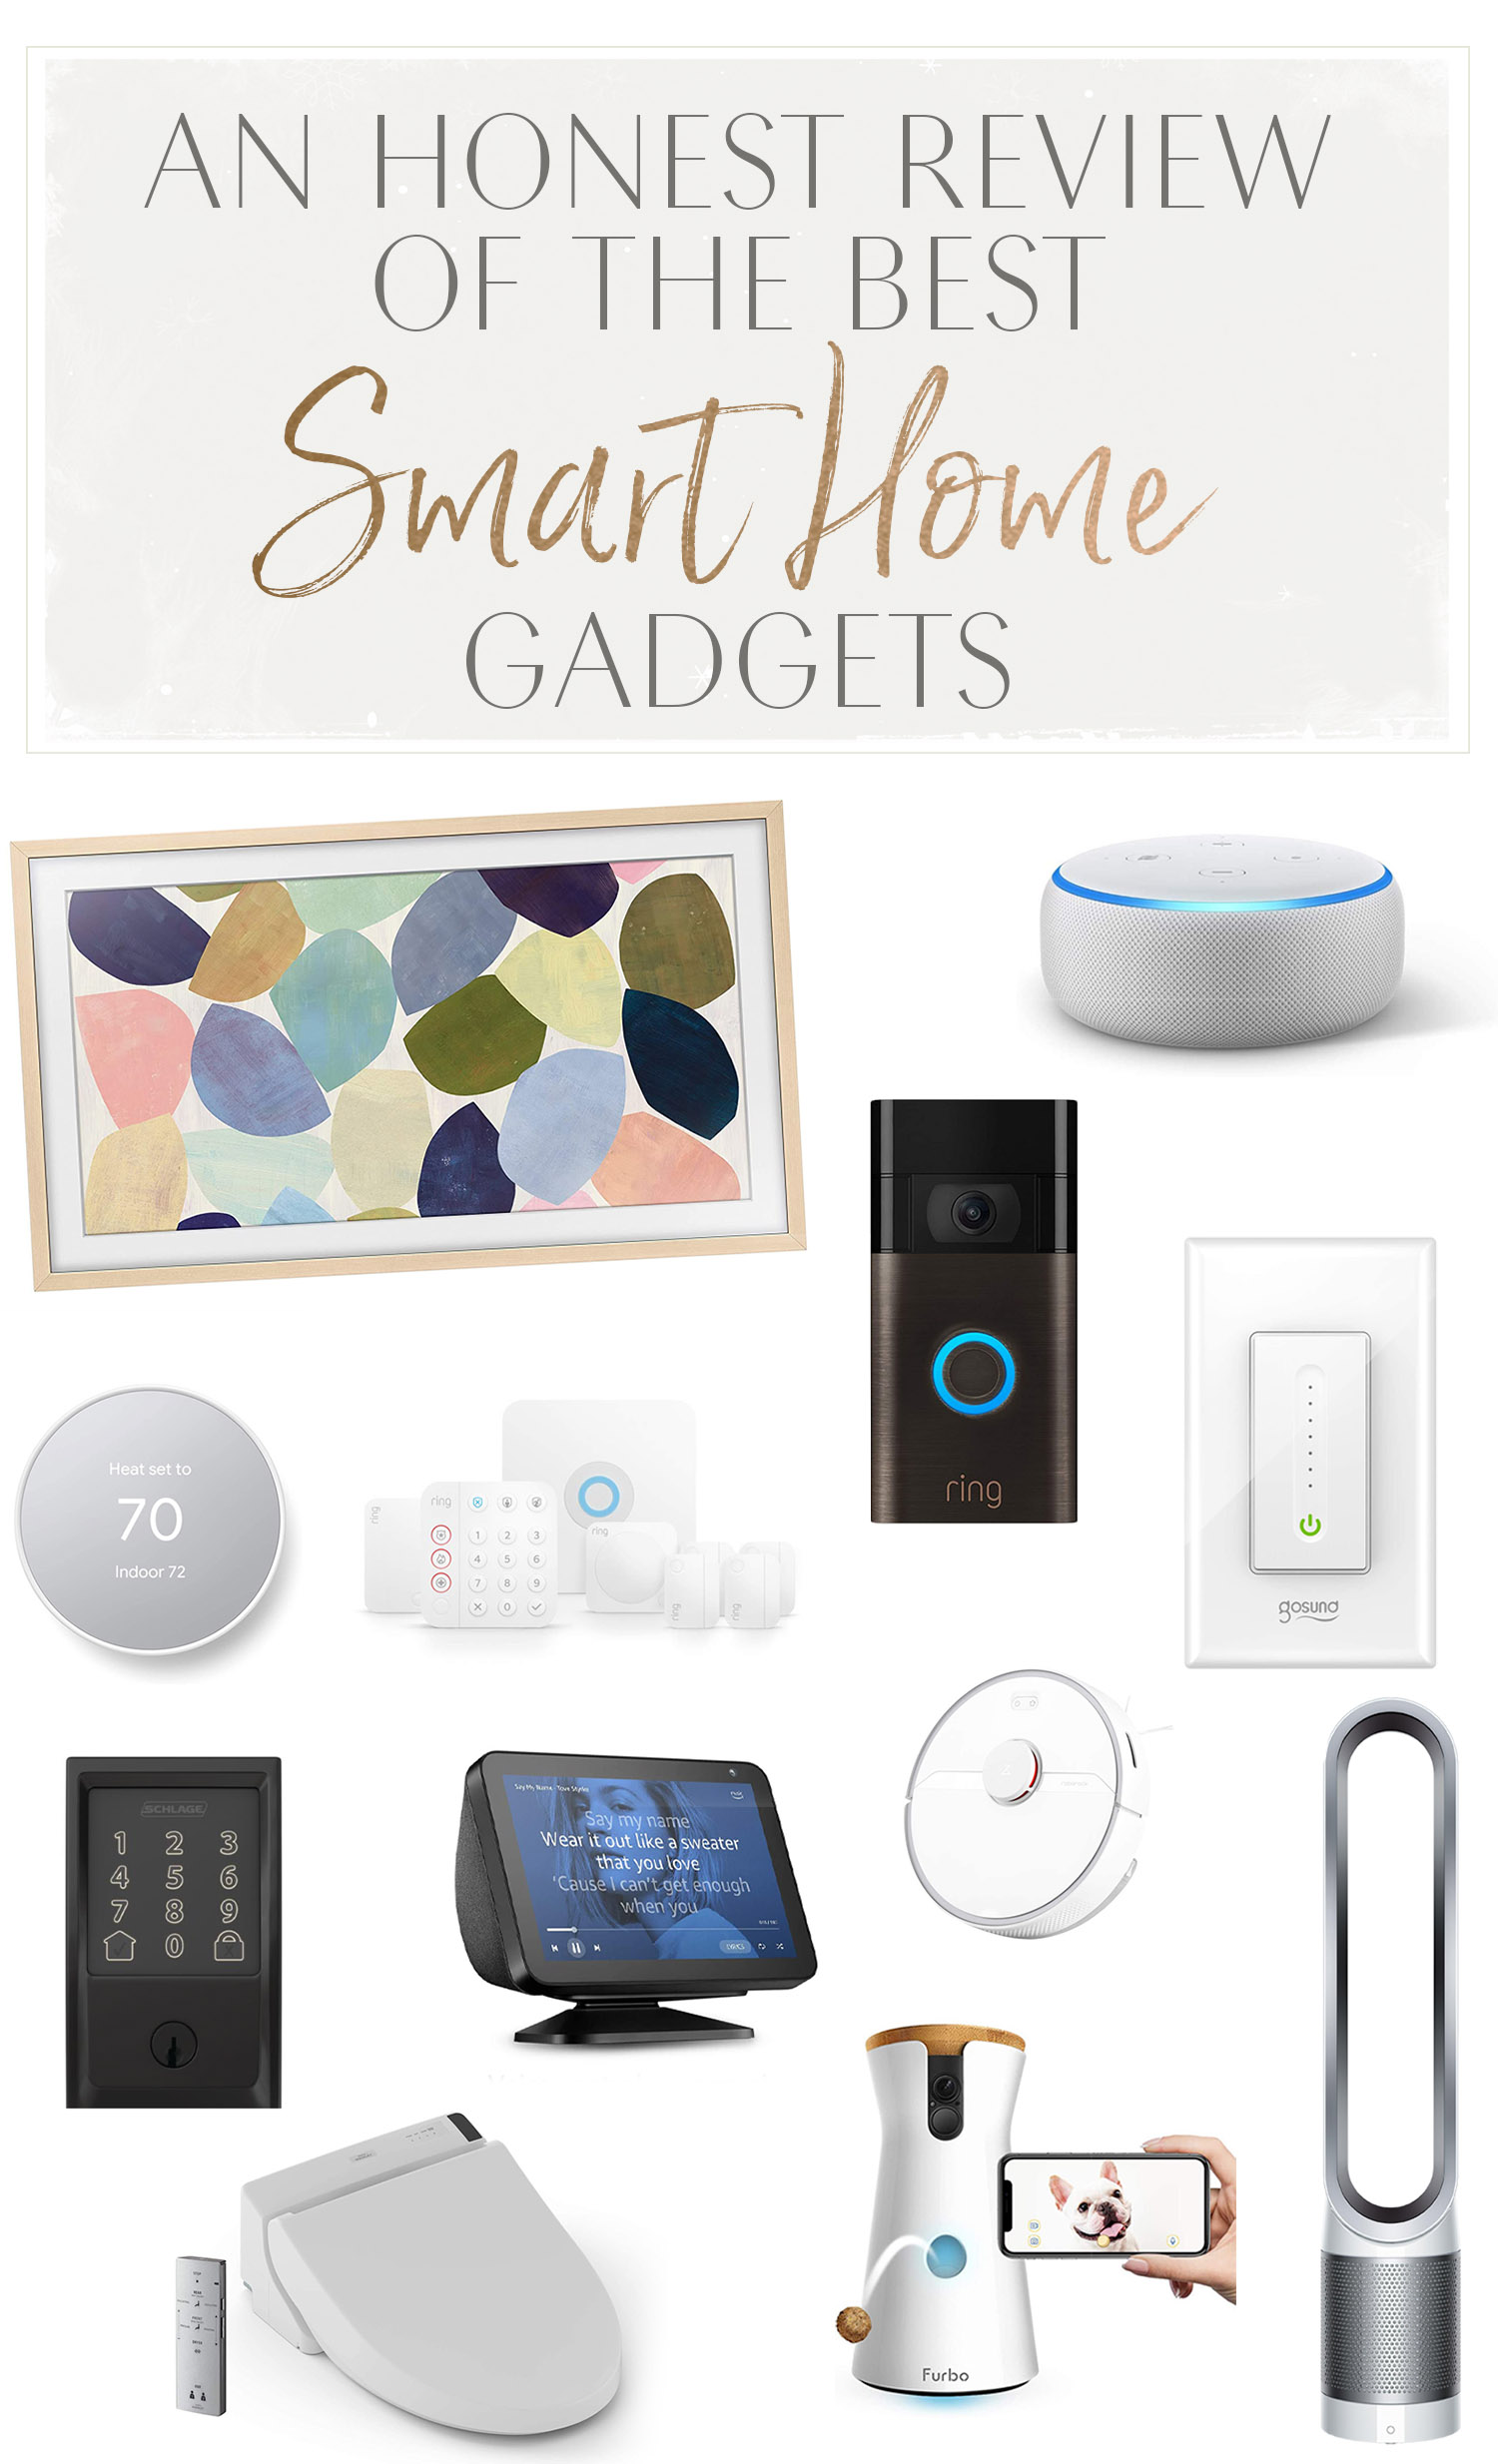 An Honest Review of the Best Smart Home Gadgets